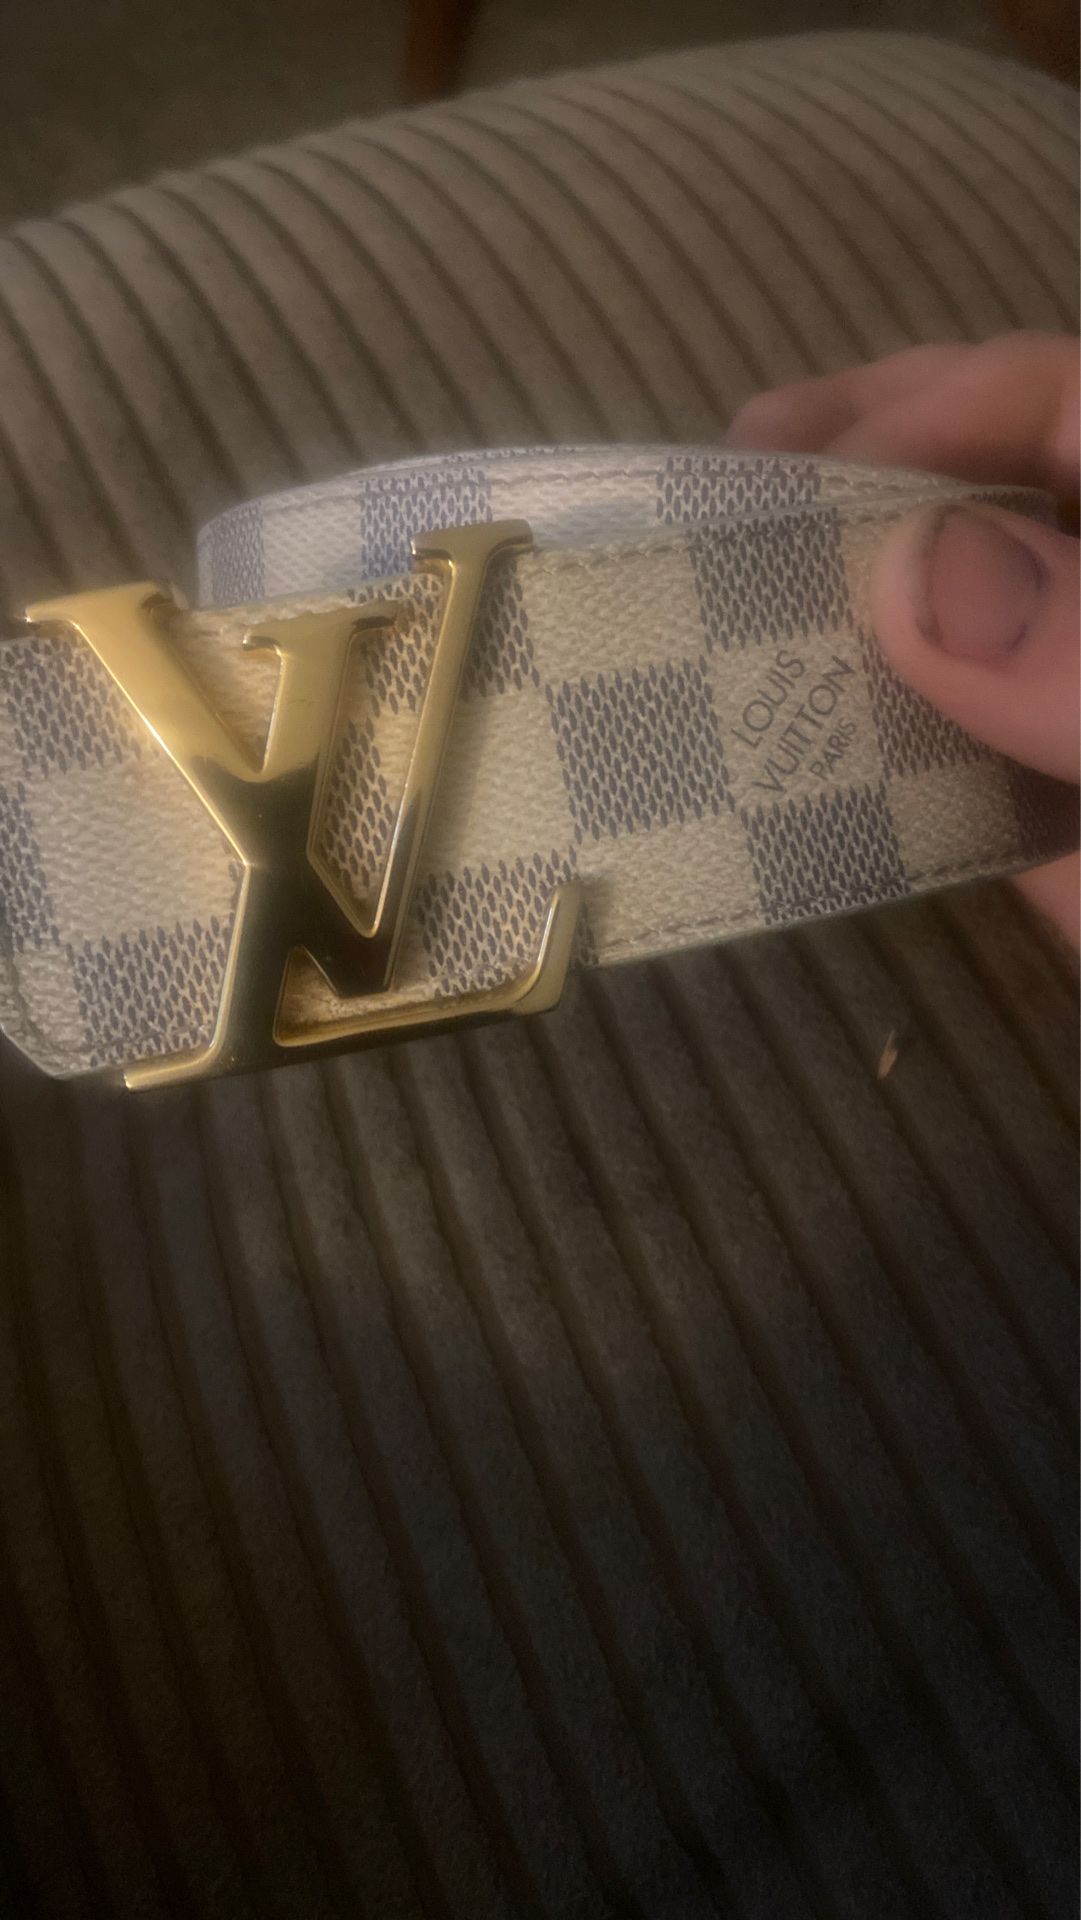 Louis Vuitton damier belt like new condition already checked for authenticity